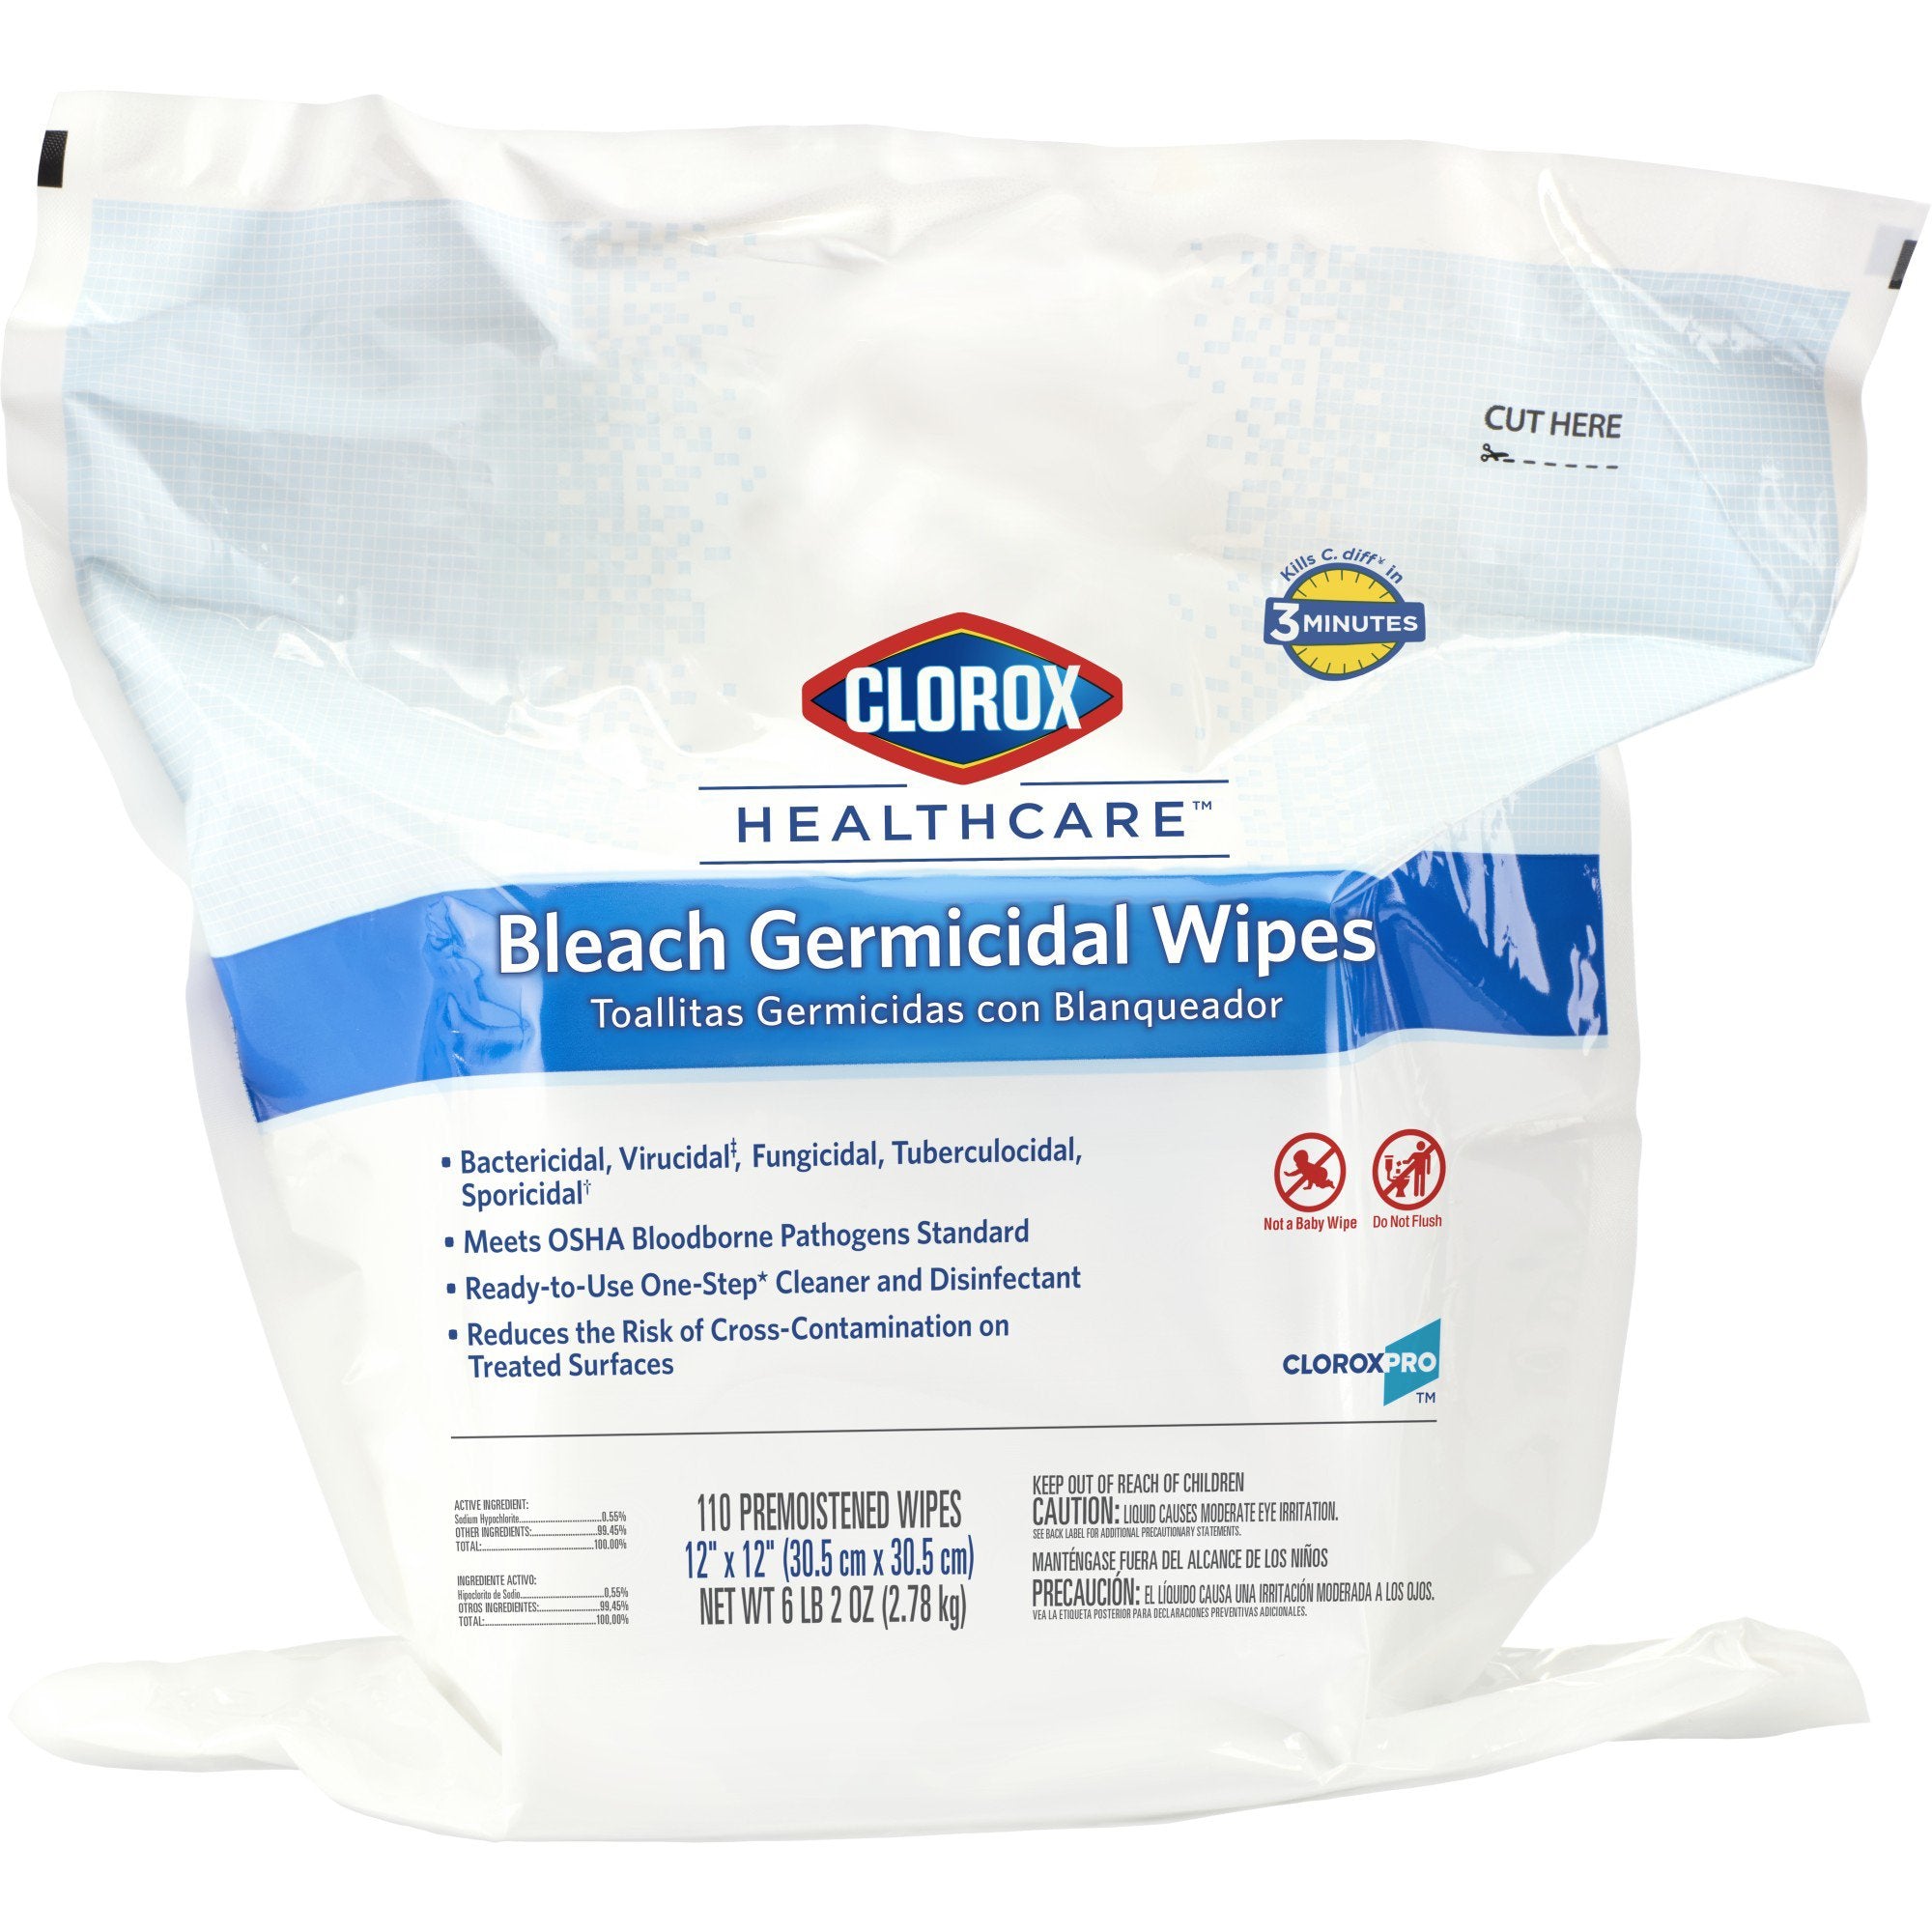 Clorox Healthcare® Bleach Germicidal Surface Disinfectant Cleaner Refill Premoistened Germicidal Manual Pull Wipe 110 Count Pouch Floral Bleach Scent NonSterile